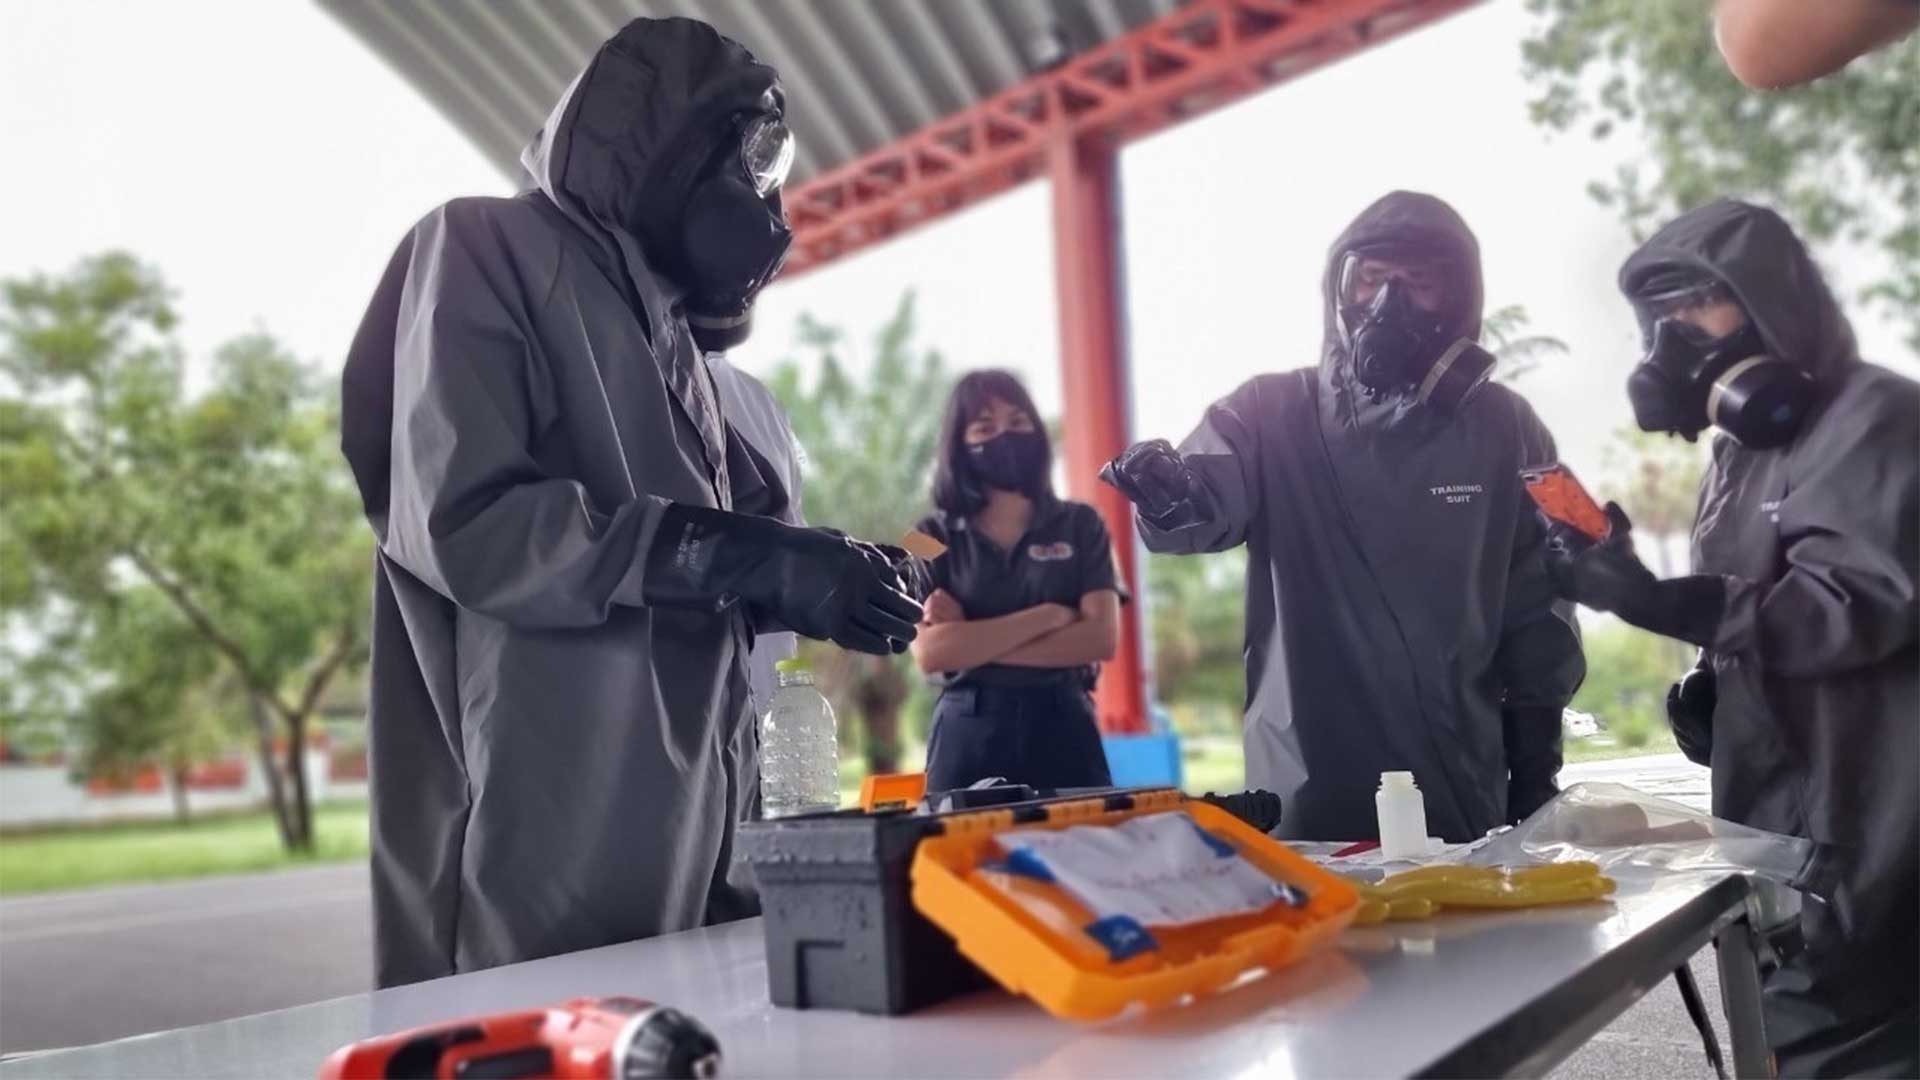 This Fall, a Defense Threat Reduction Agency (DTRA) building partnership capacity team completed an intensive three-week slate of training for Thailand.  They successfully transferred and provided training on new Chemical, Biological, Radiological and Nuclear (CBRN) detection and response equipment, followed by an in-depth Counter-WMD (CWMD) Operations course.